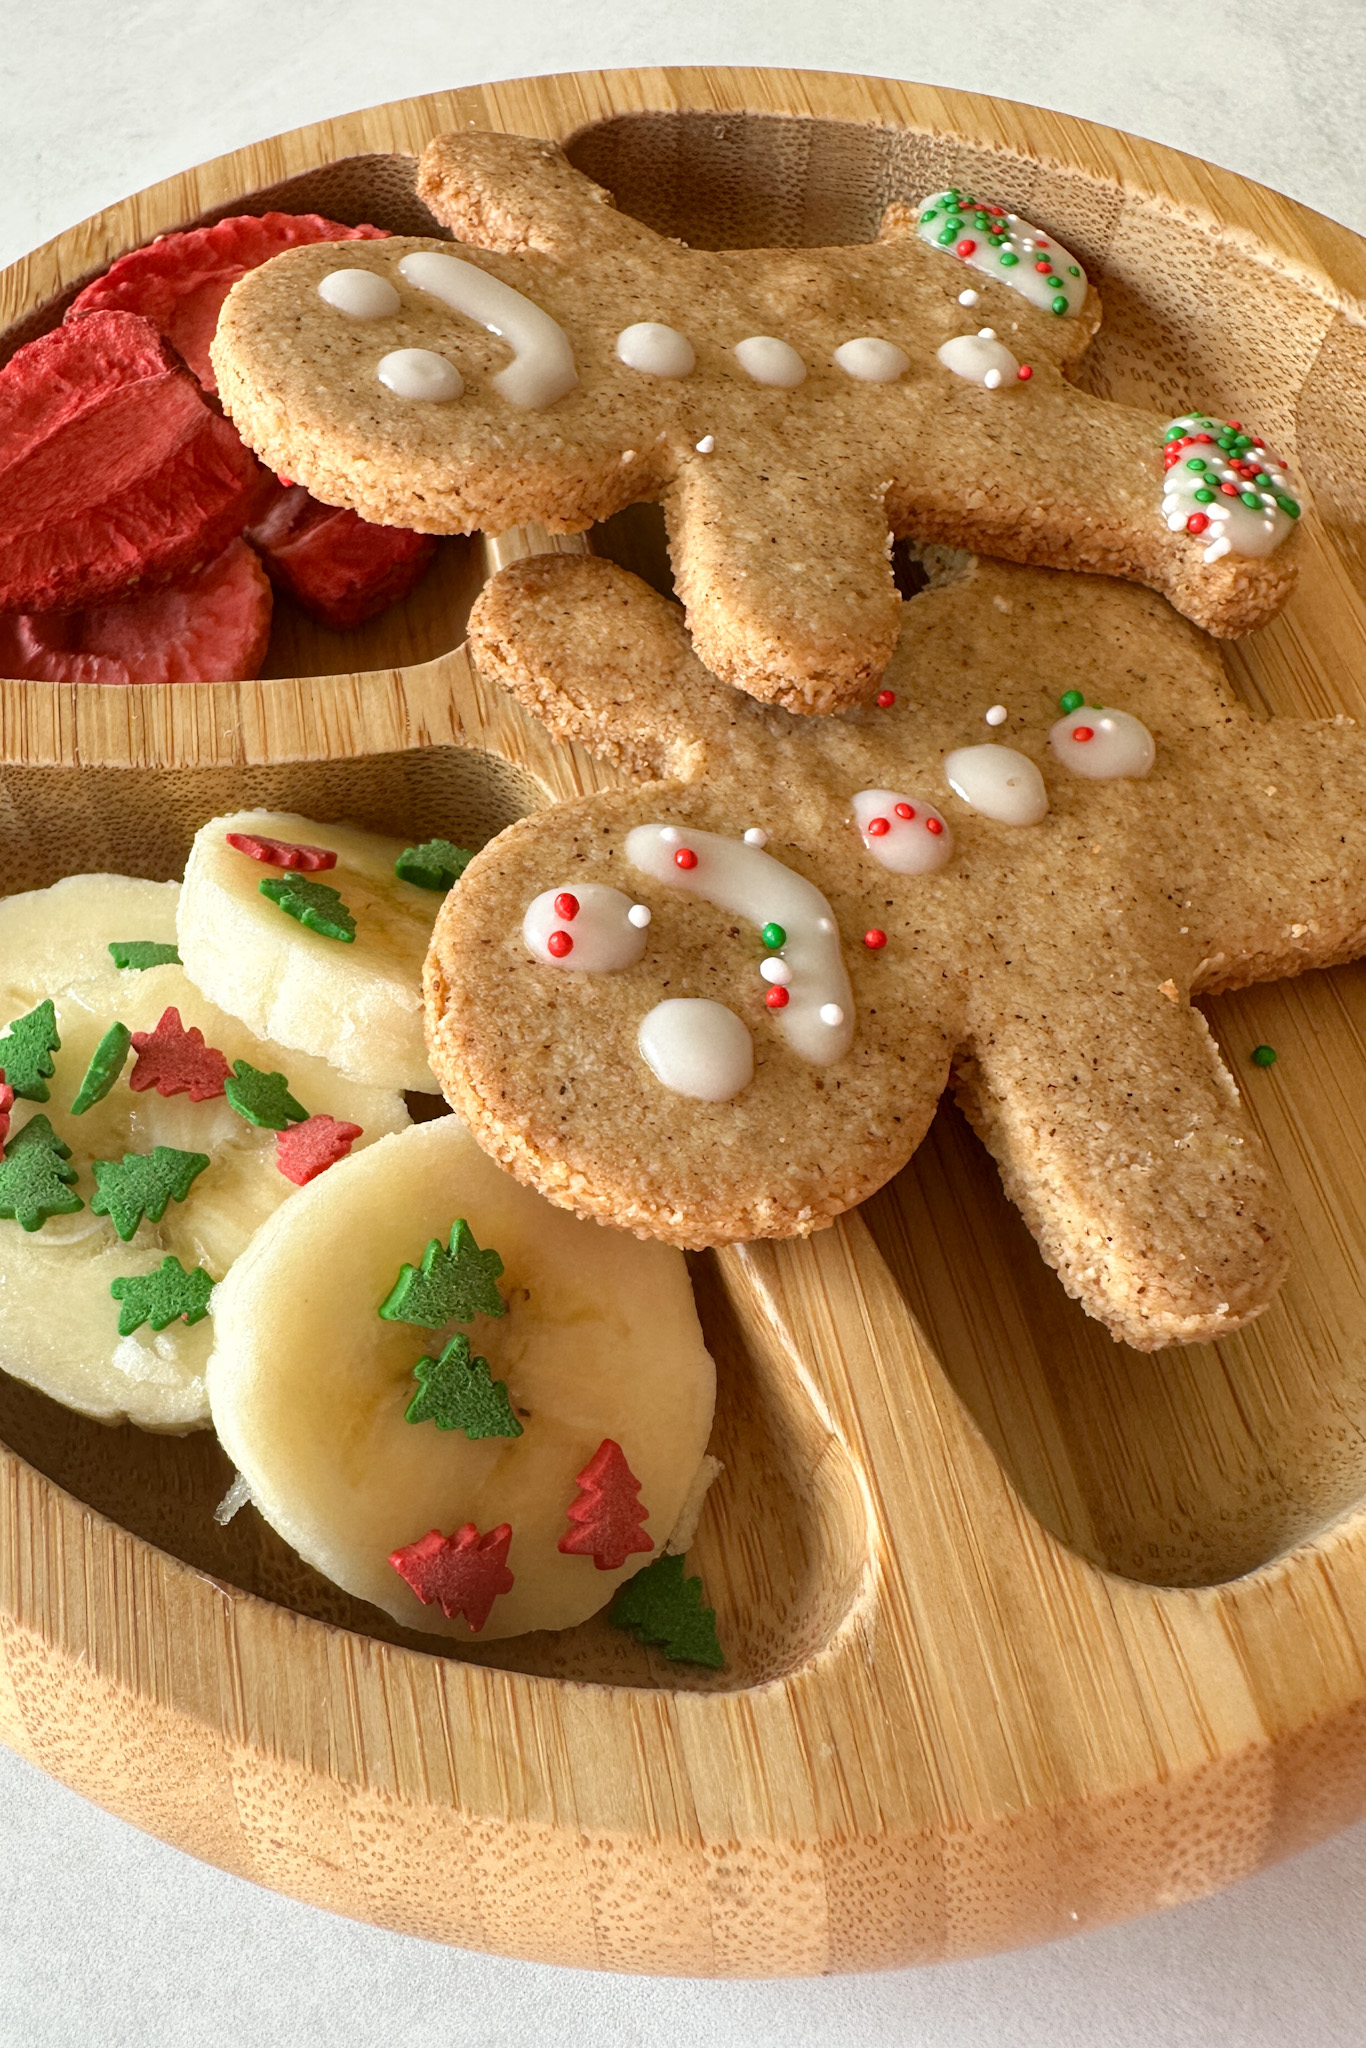 Gingerbread cookies without molasses.